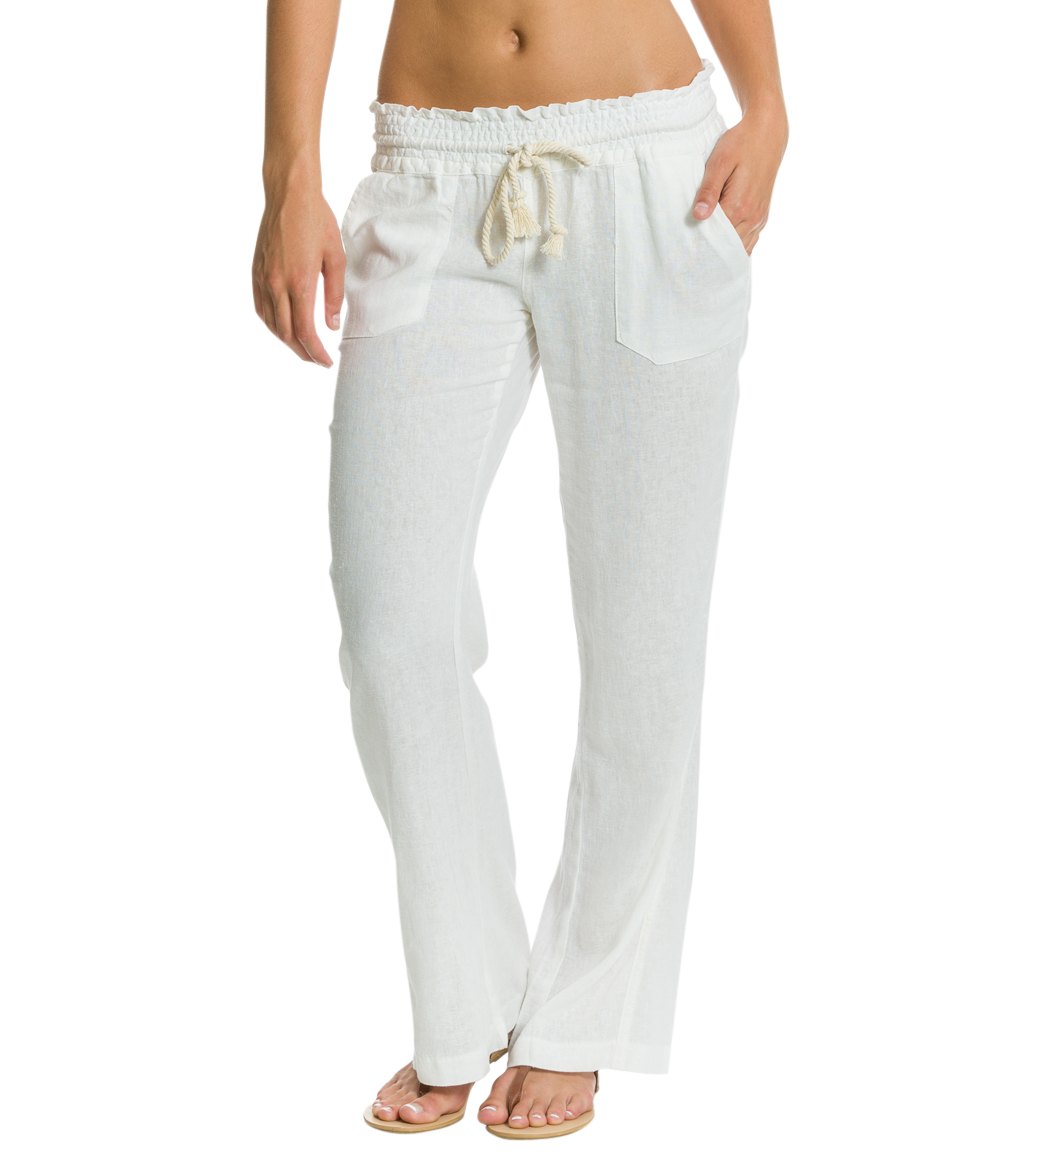 Roxy Ocean Side Beach Pant at SwimOutlet.com